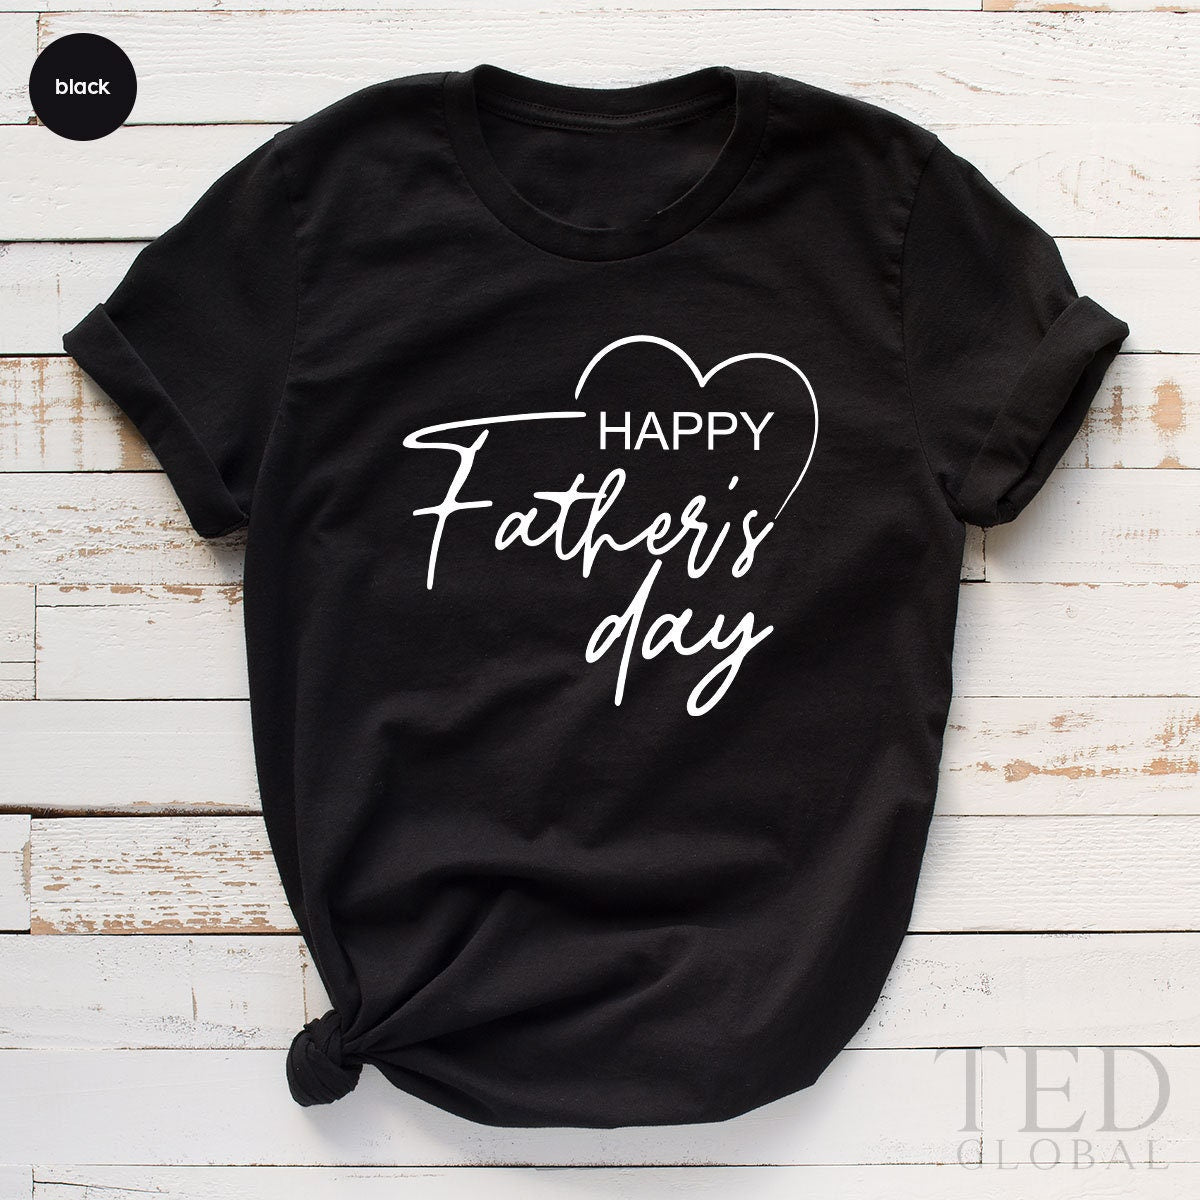 Happy Fathers Day Shirt, New Dad Gift, Fathers Day Gift From Kids, Dad Shirt, Gift For Dad, Daddy T Shirt, Grandpa Shirt, Gift For Husband - Fastdeliverytees.com